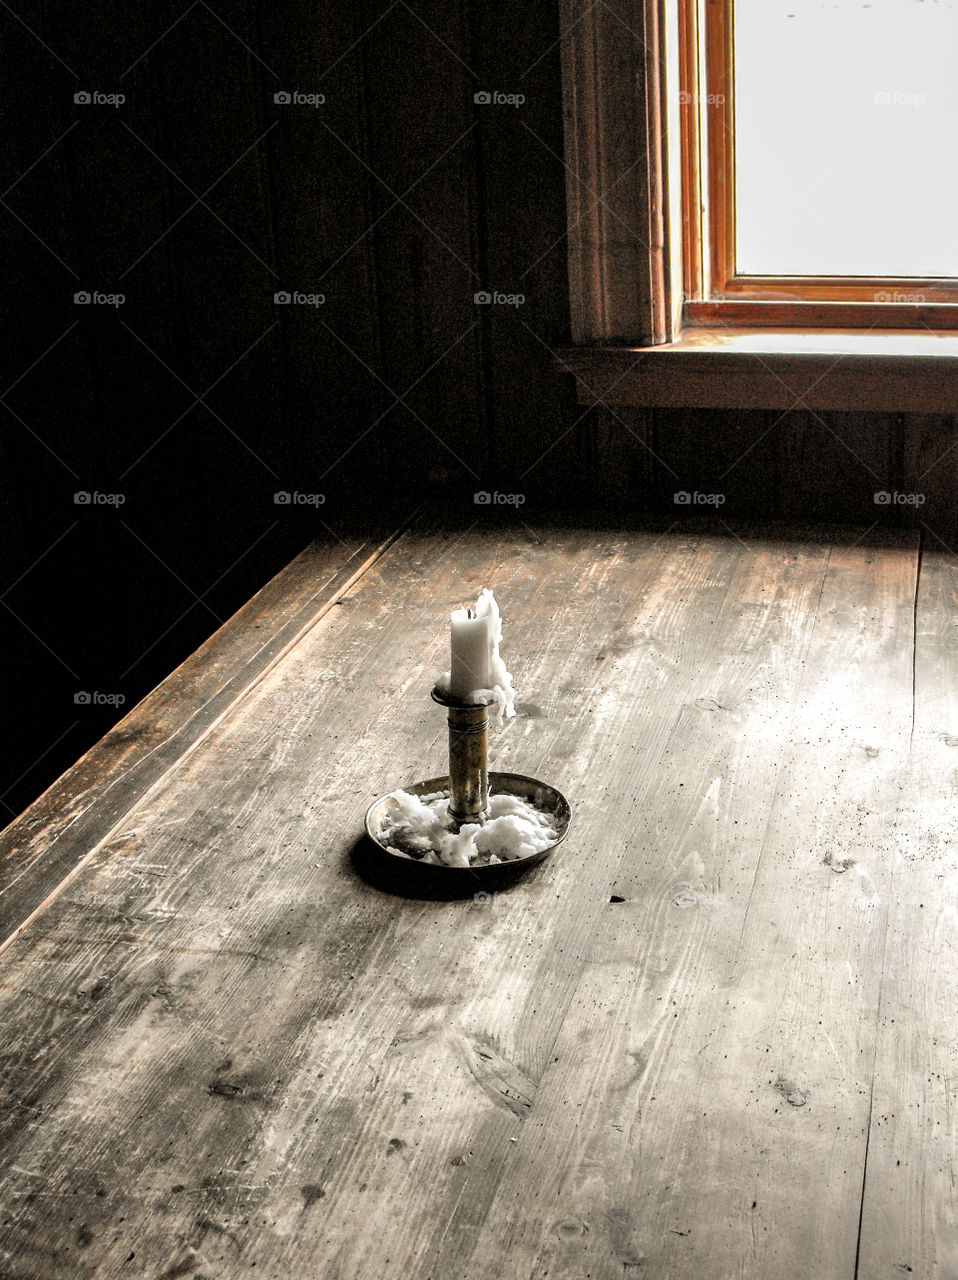 A candle on an old wooden table by a window